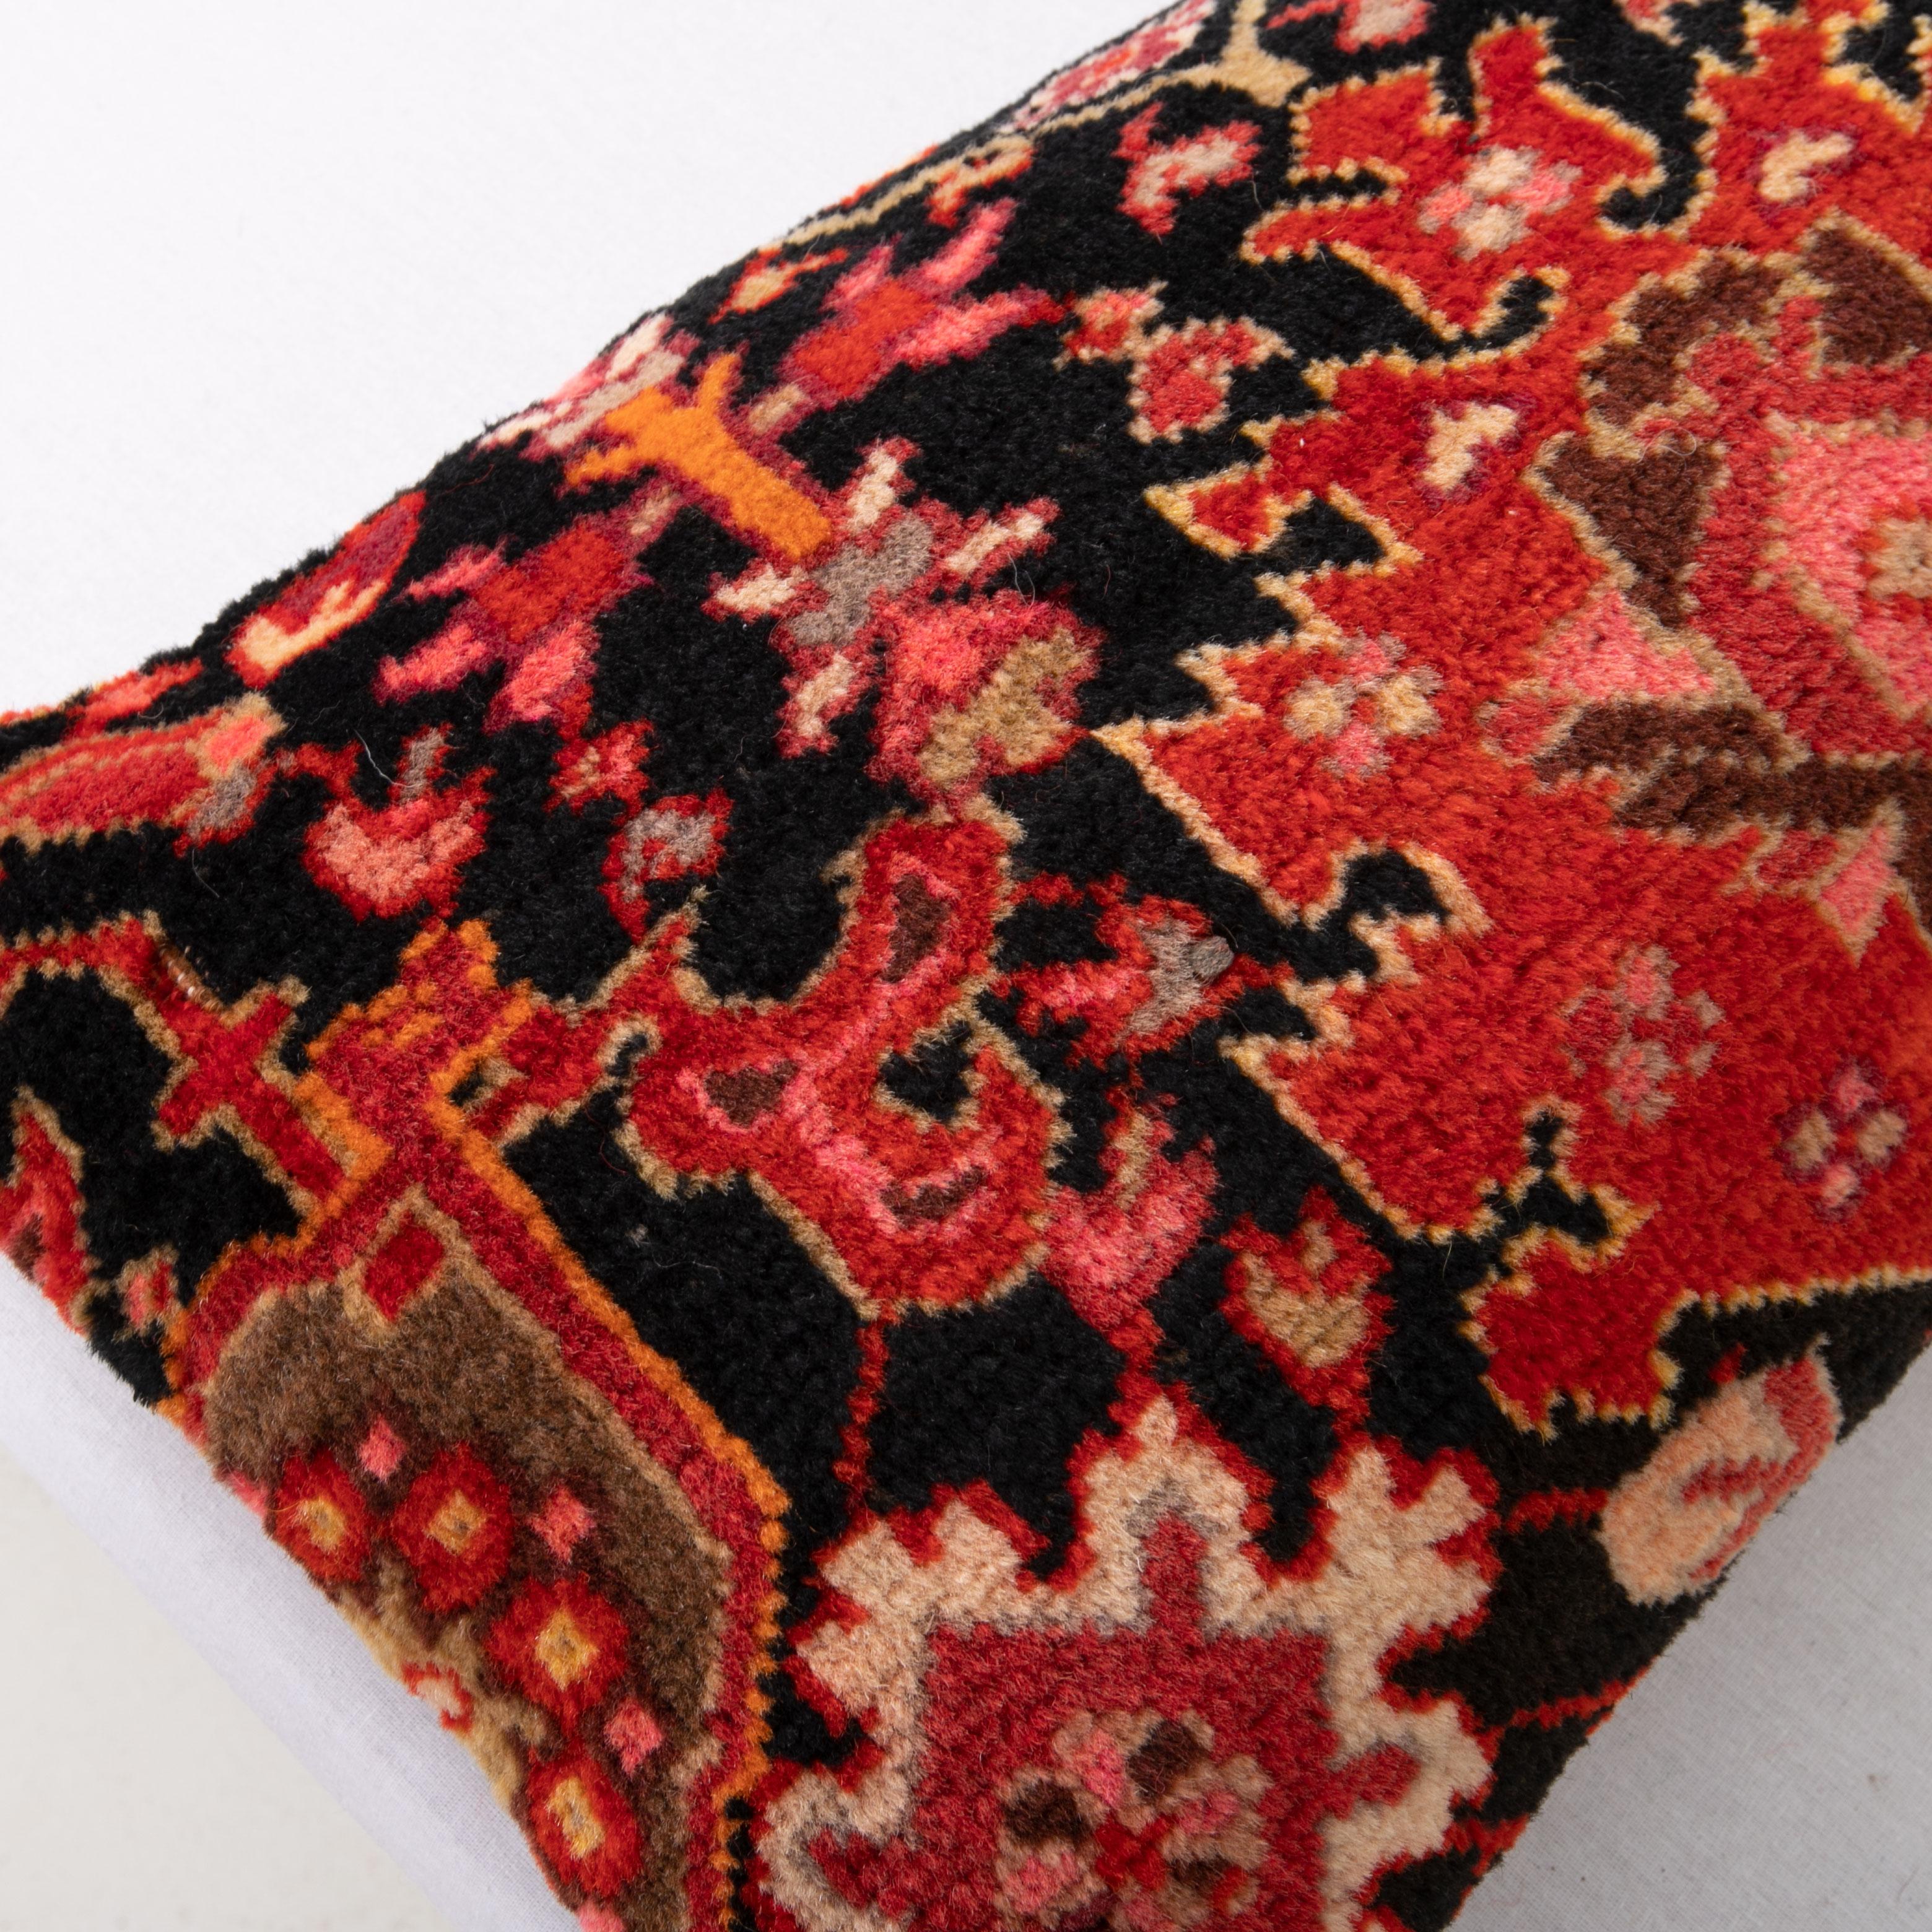 Hand-Woven Pillow Cover Made from a Caucasian Karabakh Rug, Early 20th C. For Sale